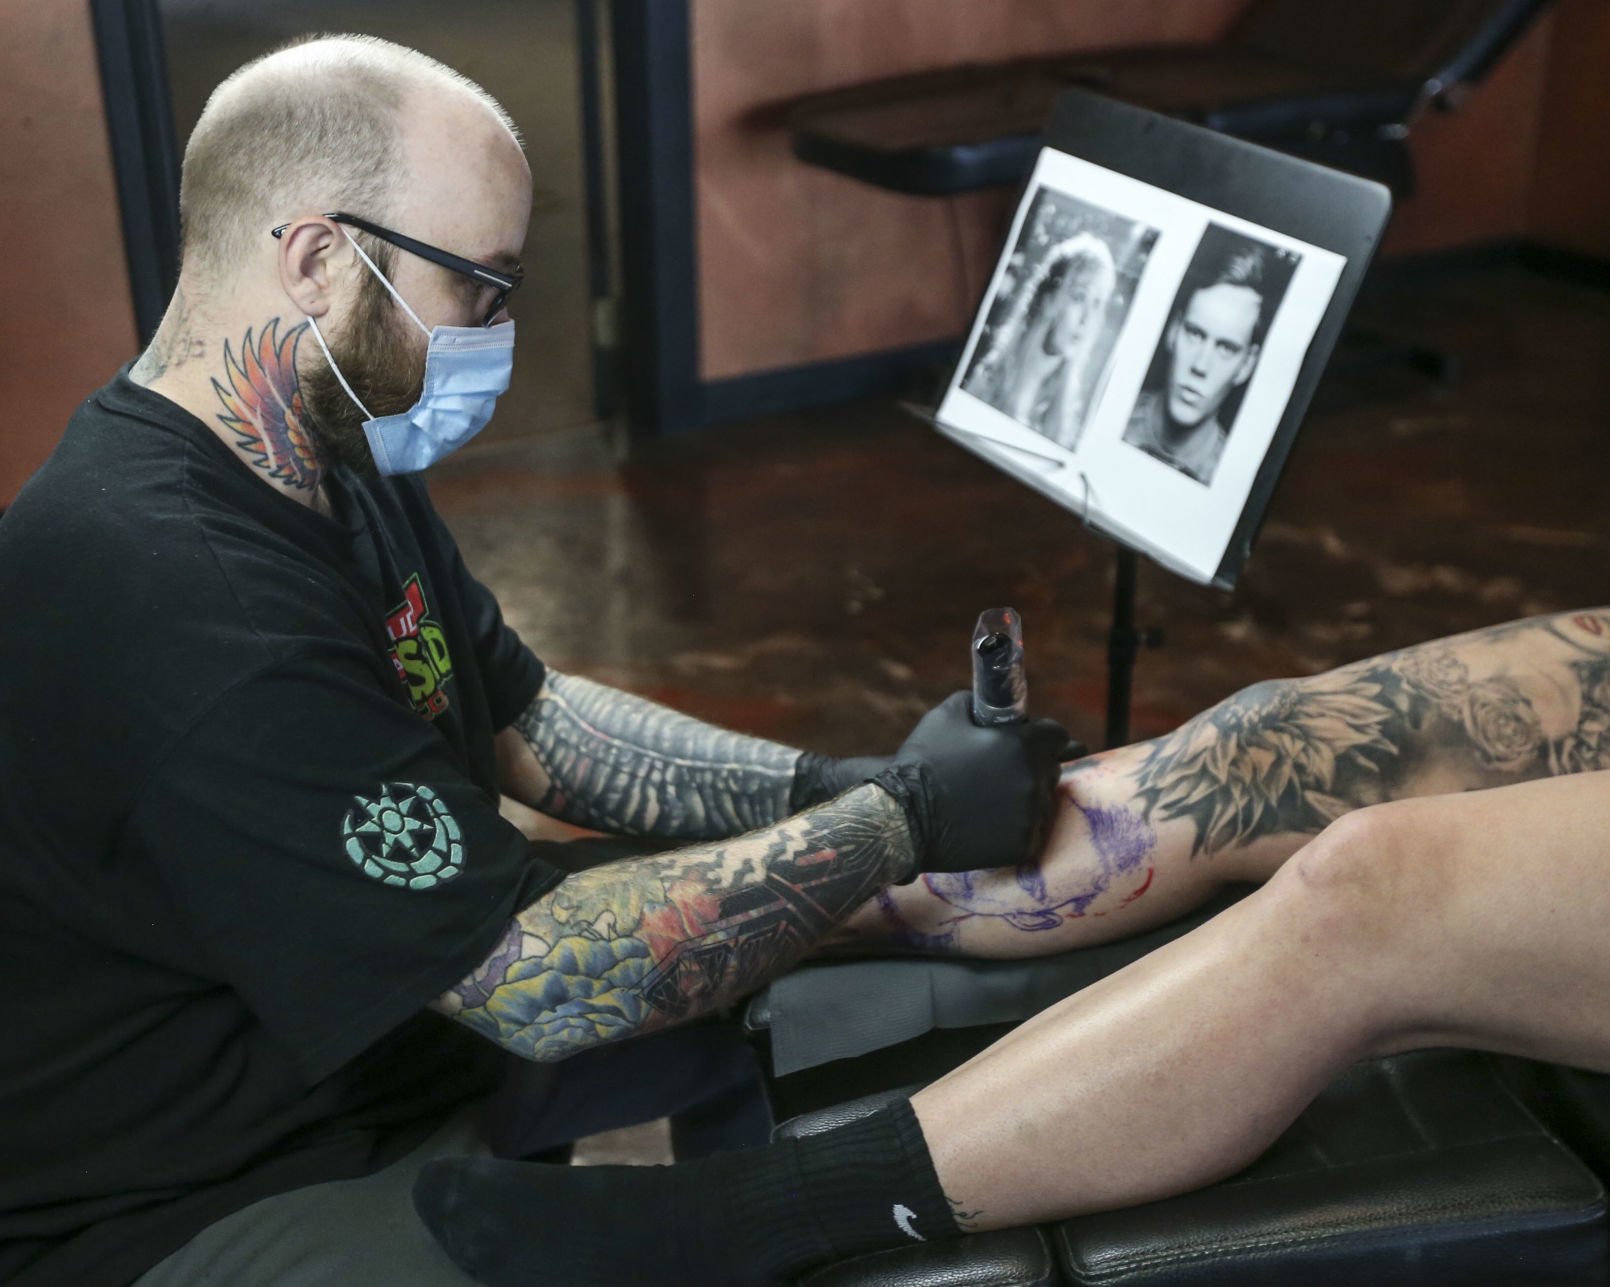 Tattoo shops slowly reopen in Iowa with some additional policies